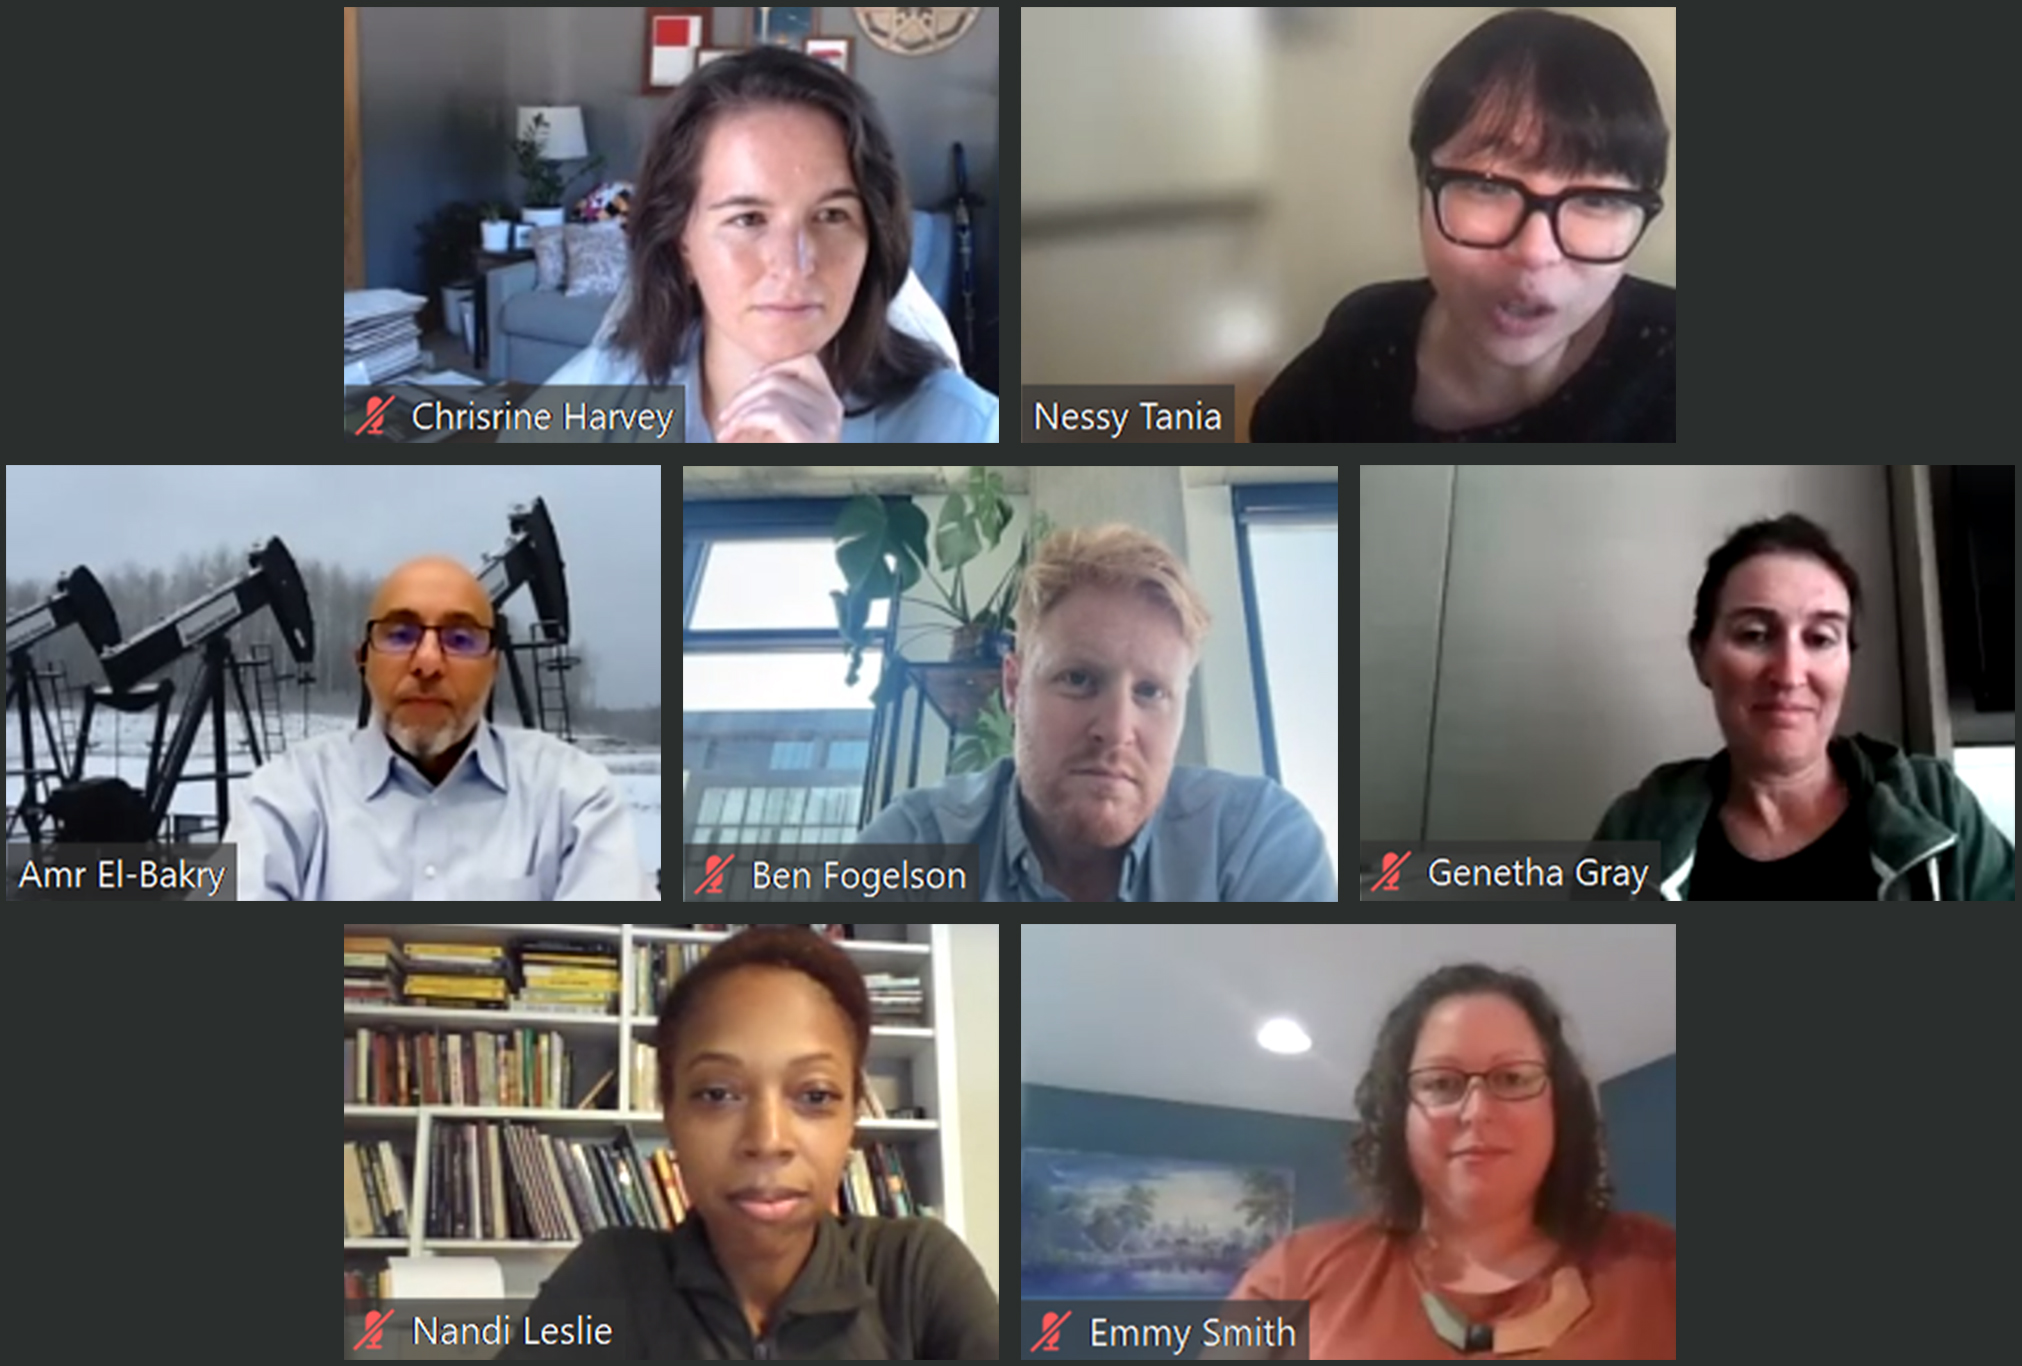 The SIAM Industry Committee sponsored a virtual career panel this August that explored career opportunities in data science and machine learning for applied mathematicians and computational scientists outside the realm of academia. Top row, left to right: moderators Christine Harvey (Mitre Corporation) and Nessy Tania (Pfizer). Middle row, left to right: Amr El-Bakry (Exxon), Ben Fogelson (Recursion Pharmaceuticals), and Genetha Gray (Edward Jones). Bottom row, left to right: Nandi Leslie (Raytheon) and Emmy Smith (Amazon).